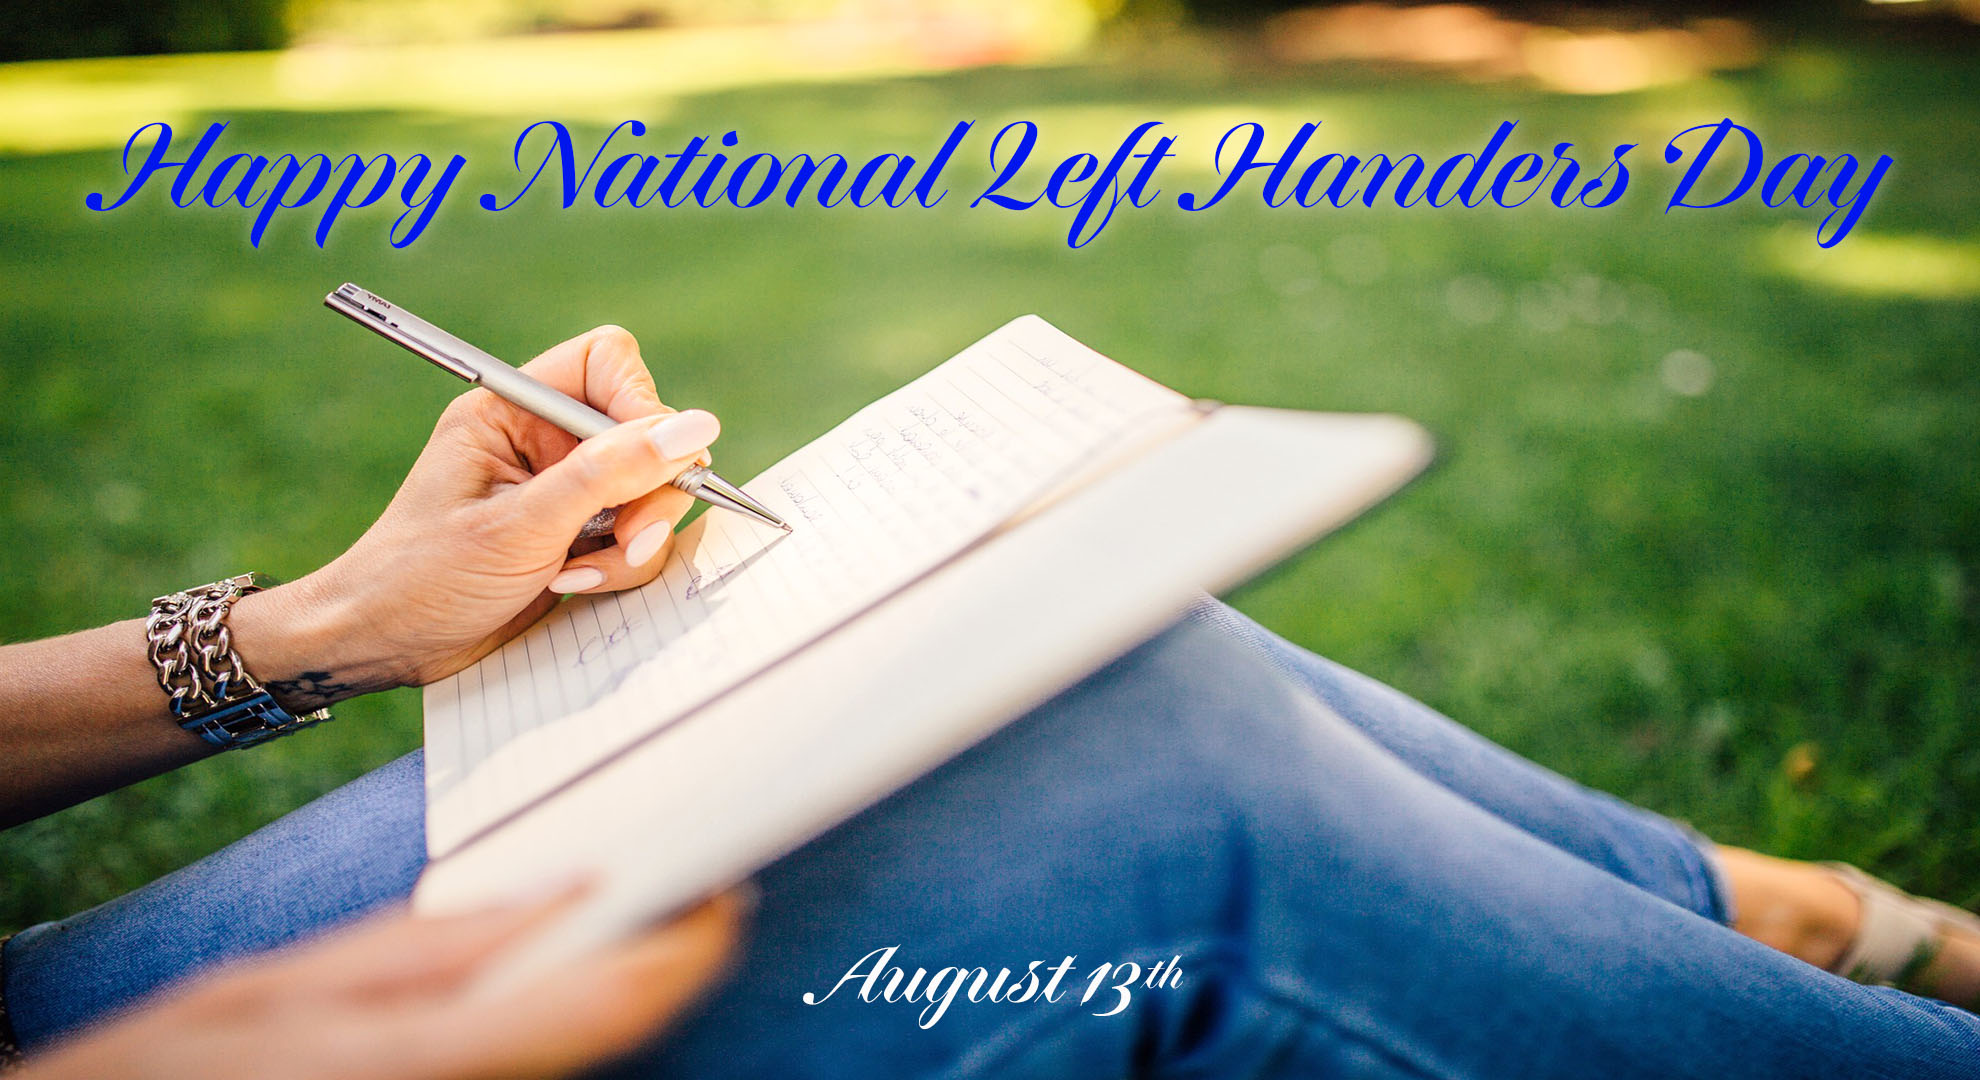 The image is of a person sitting on the ground writing in a journal. They appear to be left handed. Happy NAtional Left Handers Day is written across the top in a vivid blue script font. Towards the bottom middle of the screen August 13th is written in the same white script font.